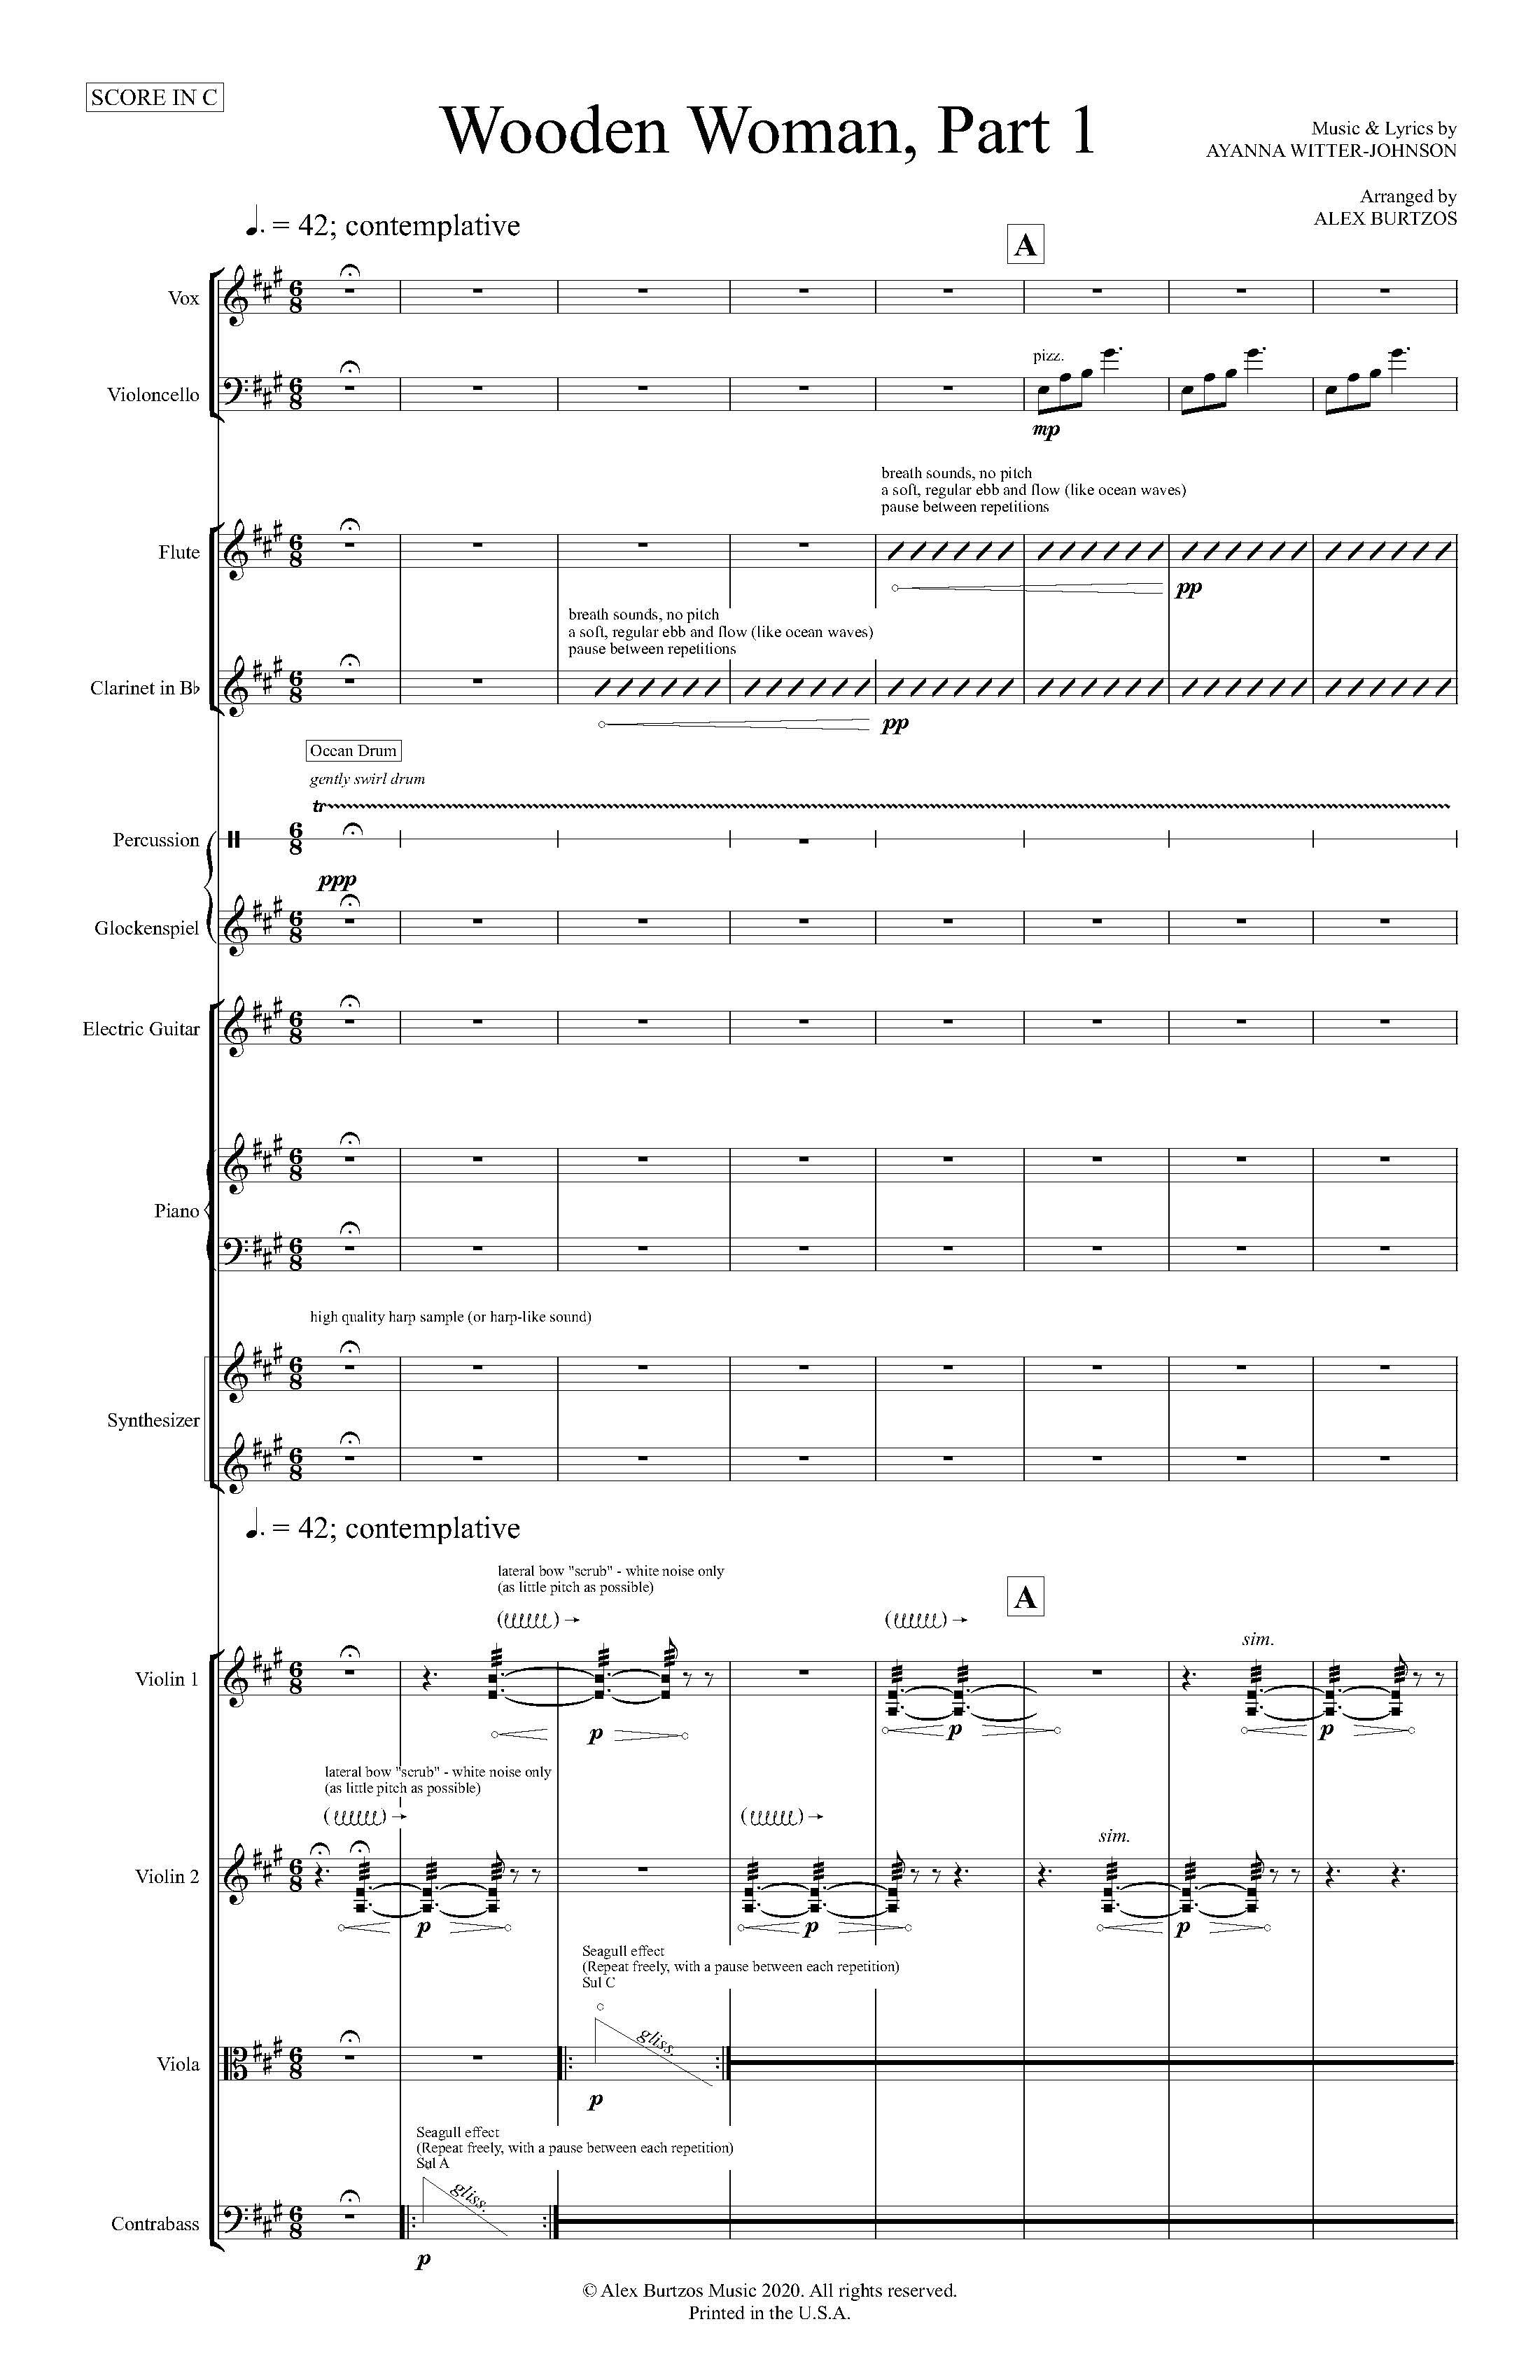 Wooden Woman - Complete Score_Page_07.jpg